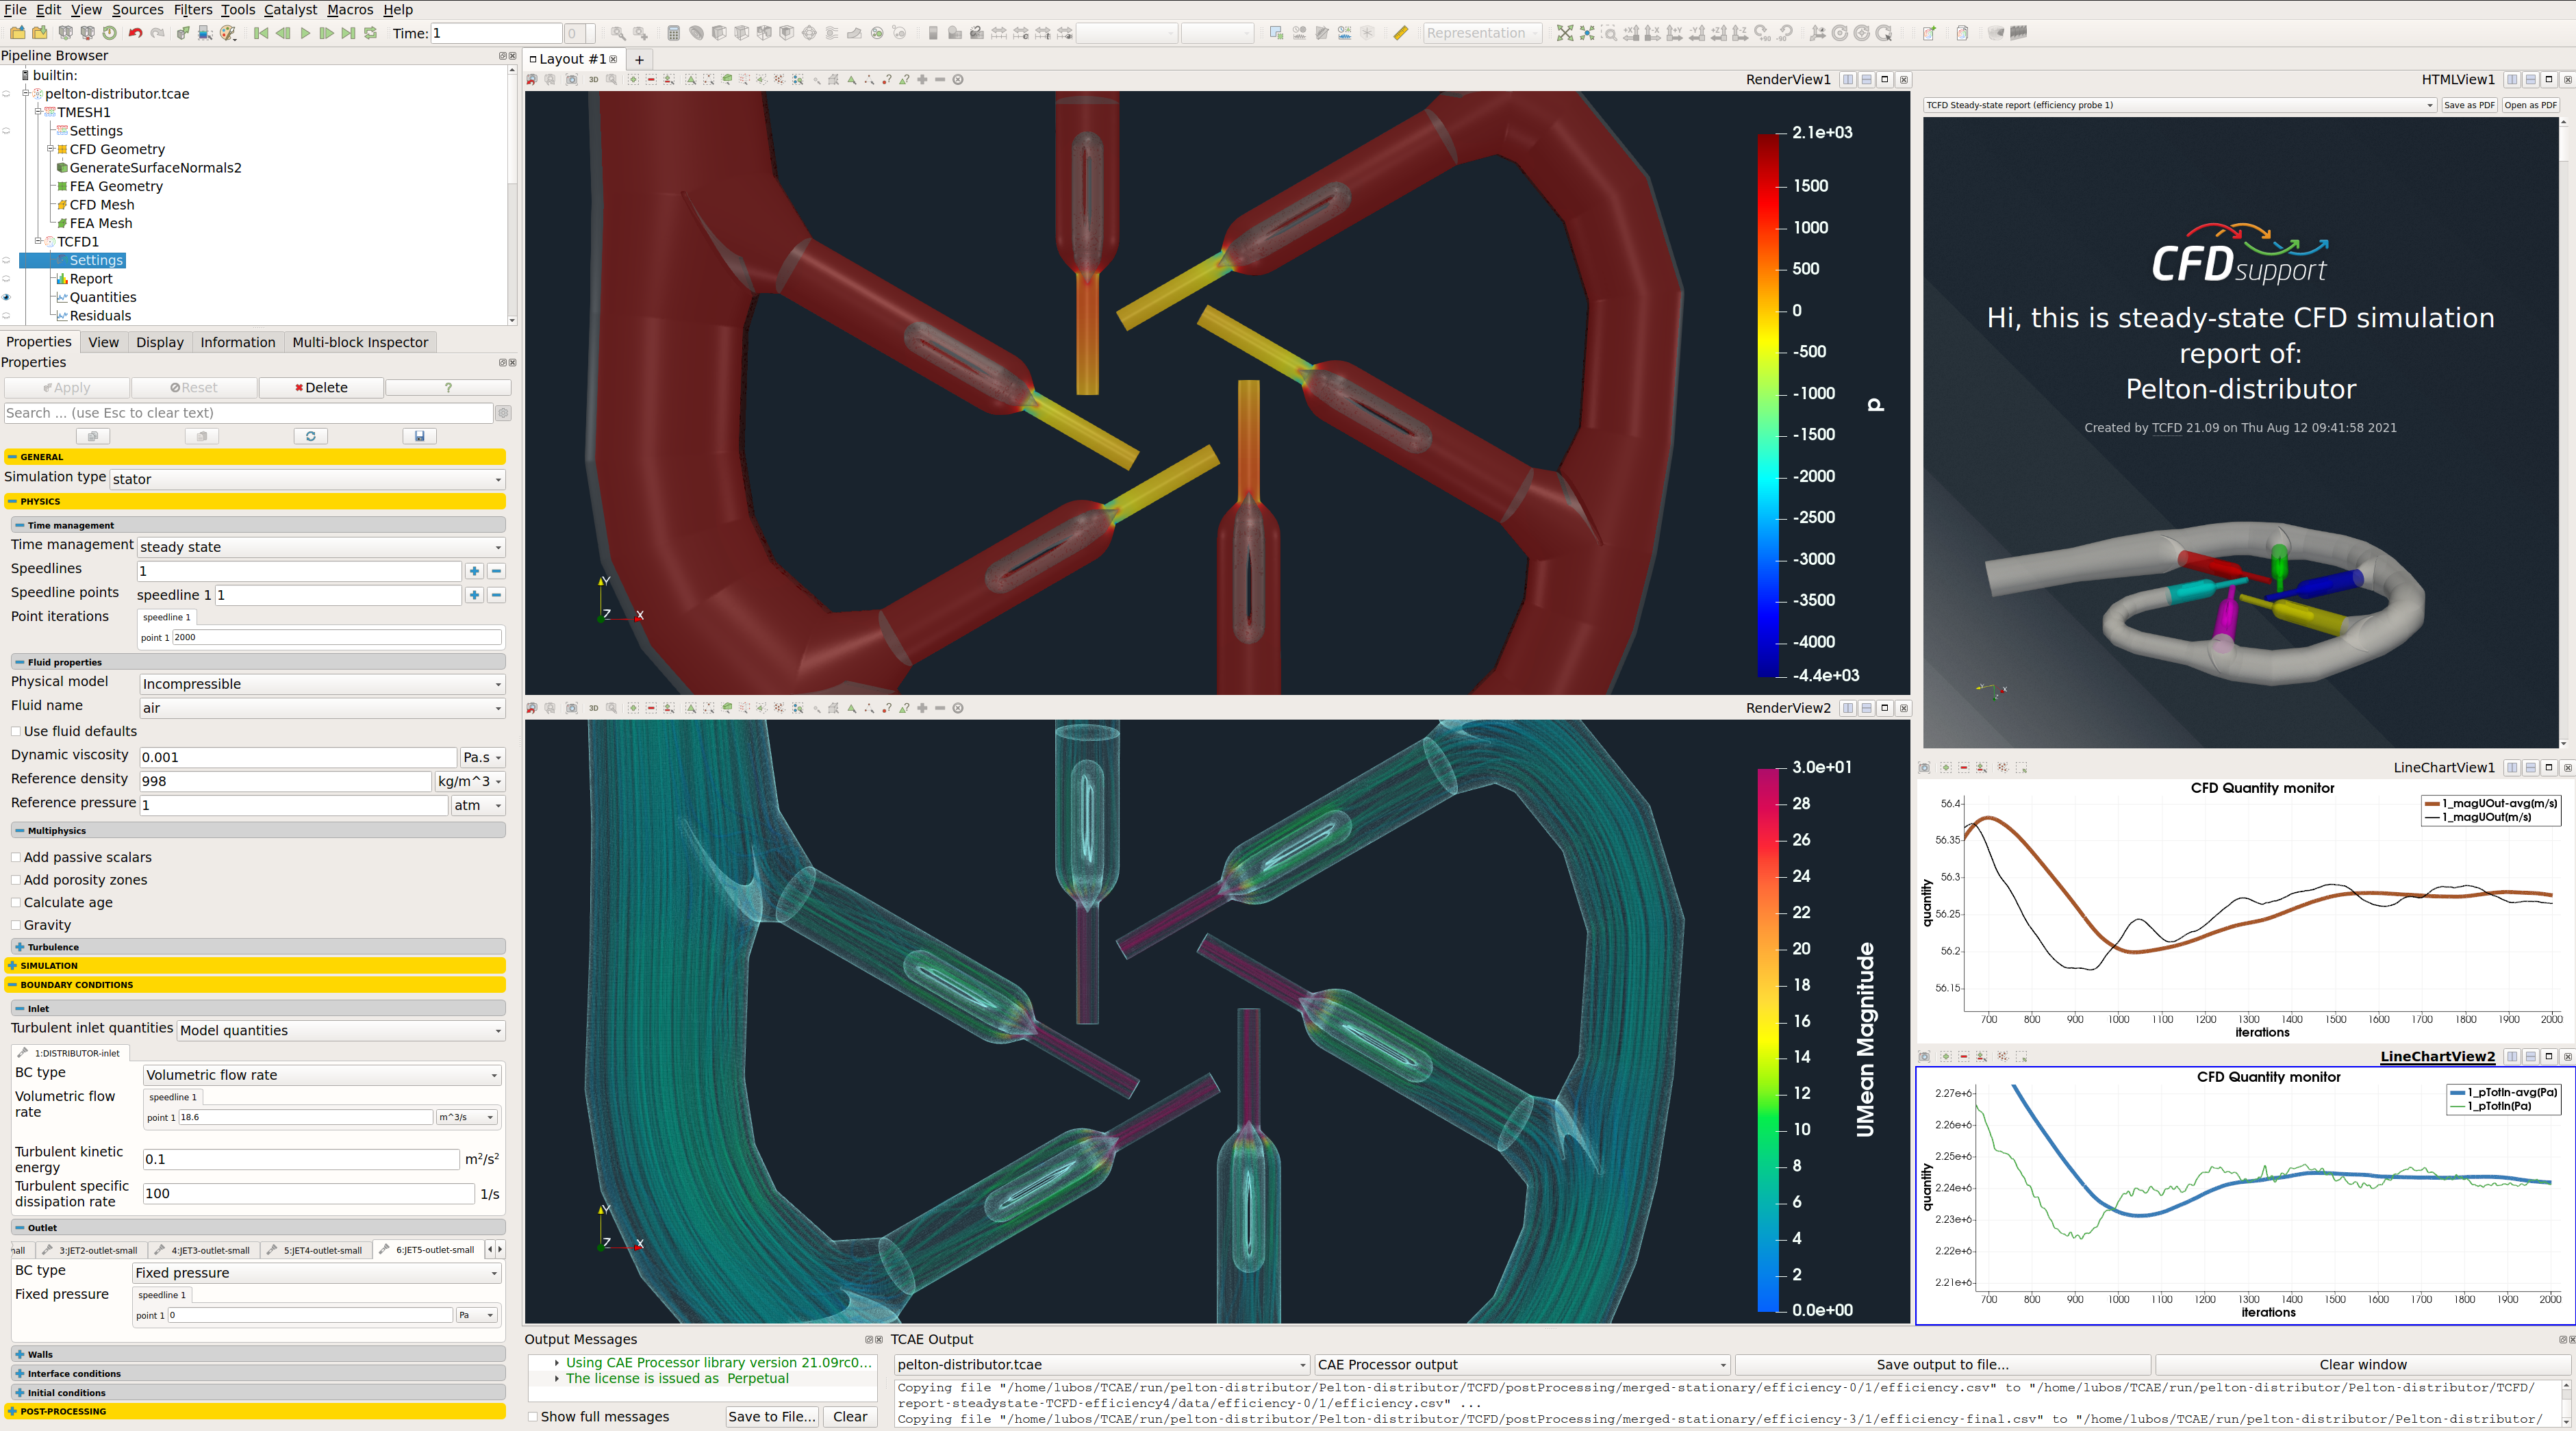 Pelton distributor simulation by TCAE quantities streamtracer CFD